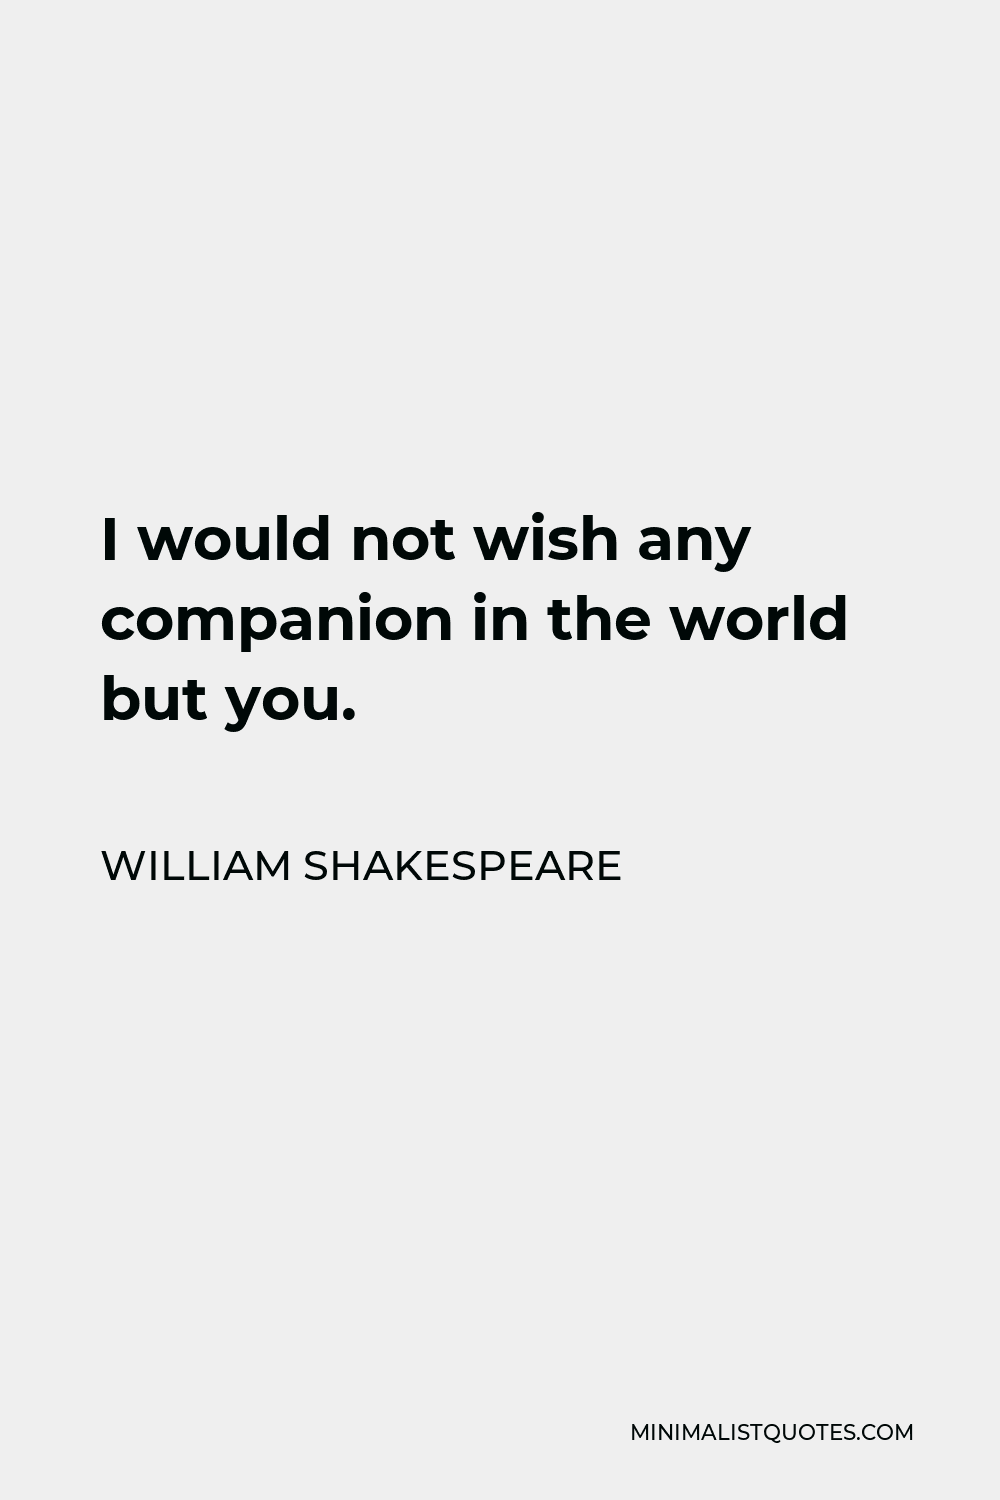 William Shakespeare Quote - I would not wish any companion in the world but you.